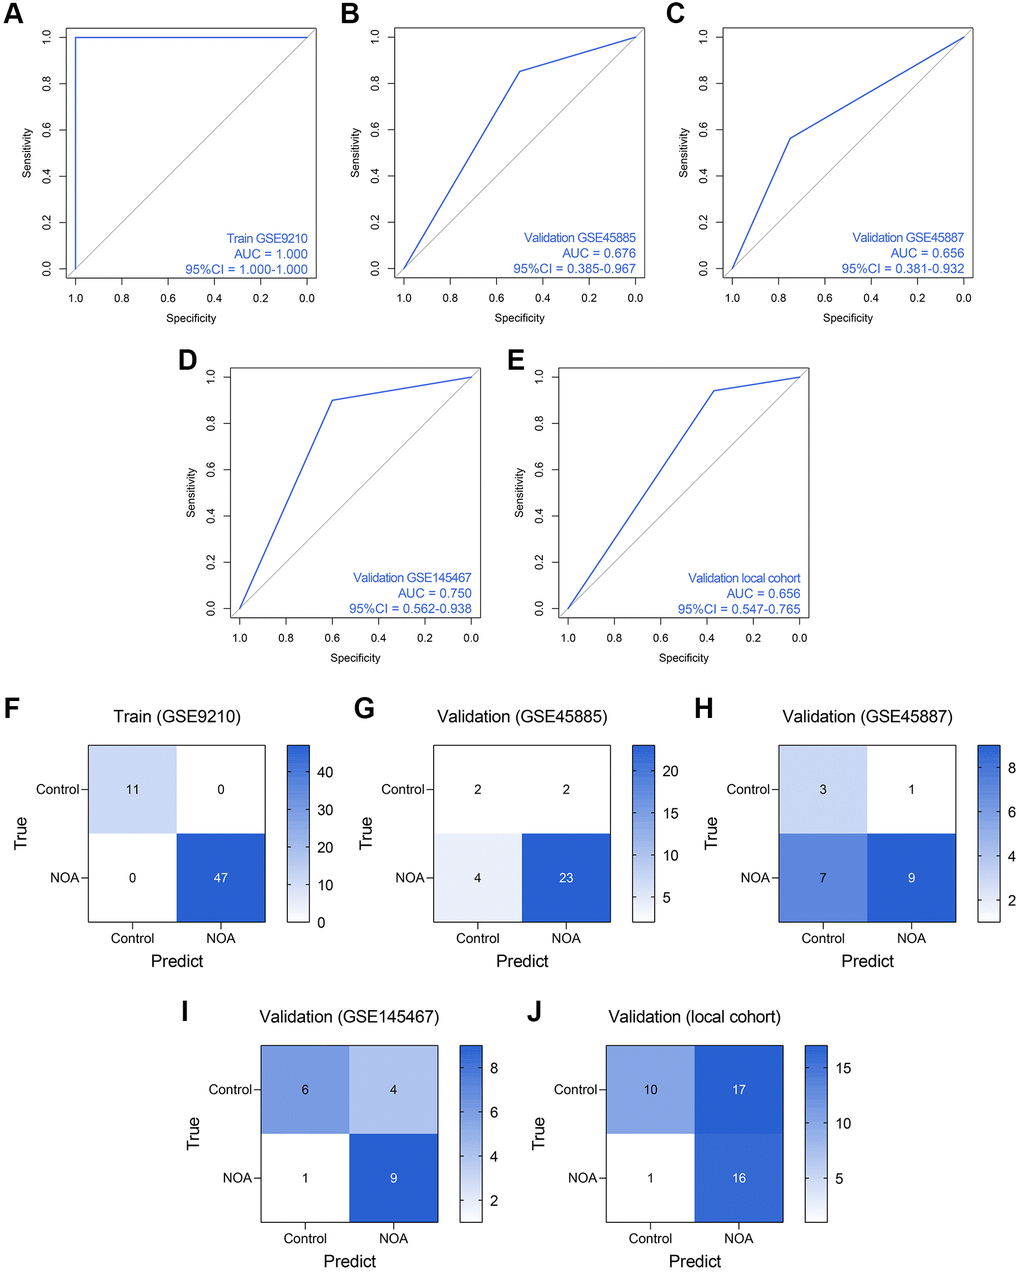 The predictive performance of an RF diagnosis model in each cohort. (A–E) The ROC analyses of the RF model in the training cohort (A), GSE45885 cohort (B), GSE45887 cohort (C), GSE145467 cohort (D), and the local cohort (E). (F–J) The confusion matrices of the RF model in the training cohort (F), GSE45885 cohort (G), GSE45887 cohort (H), GSE145467 cohort (I), and the local cohort (J). Abbreviation: RF: random forest.